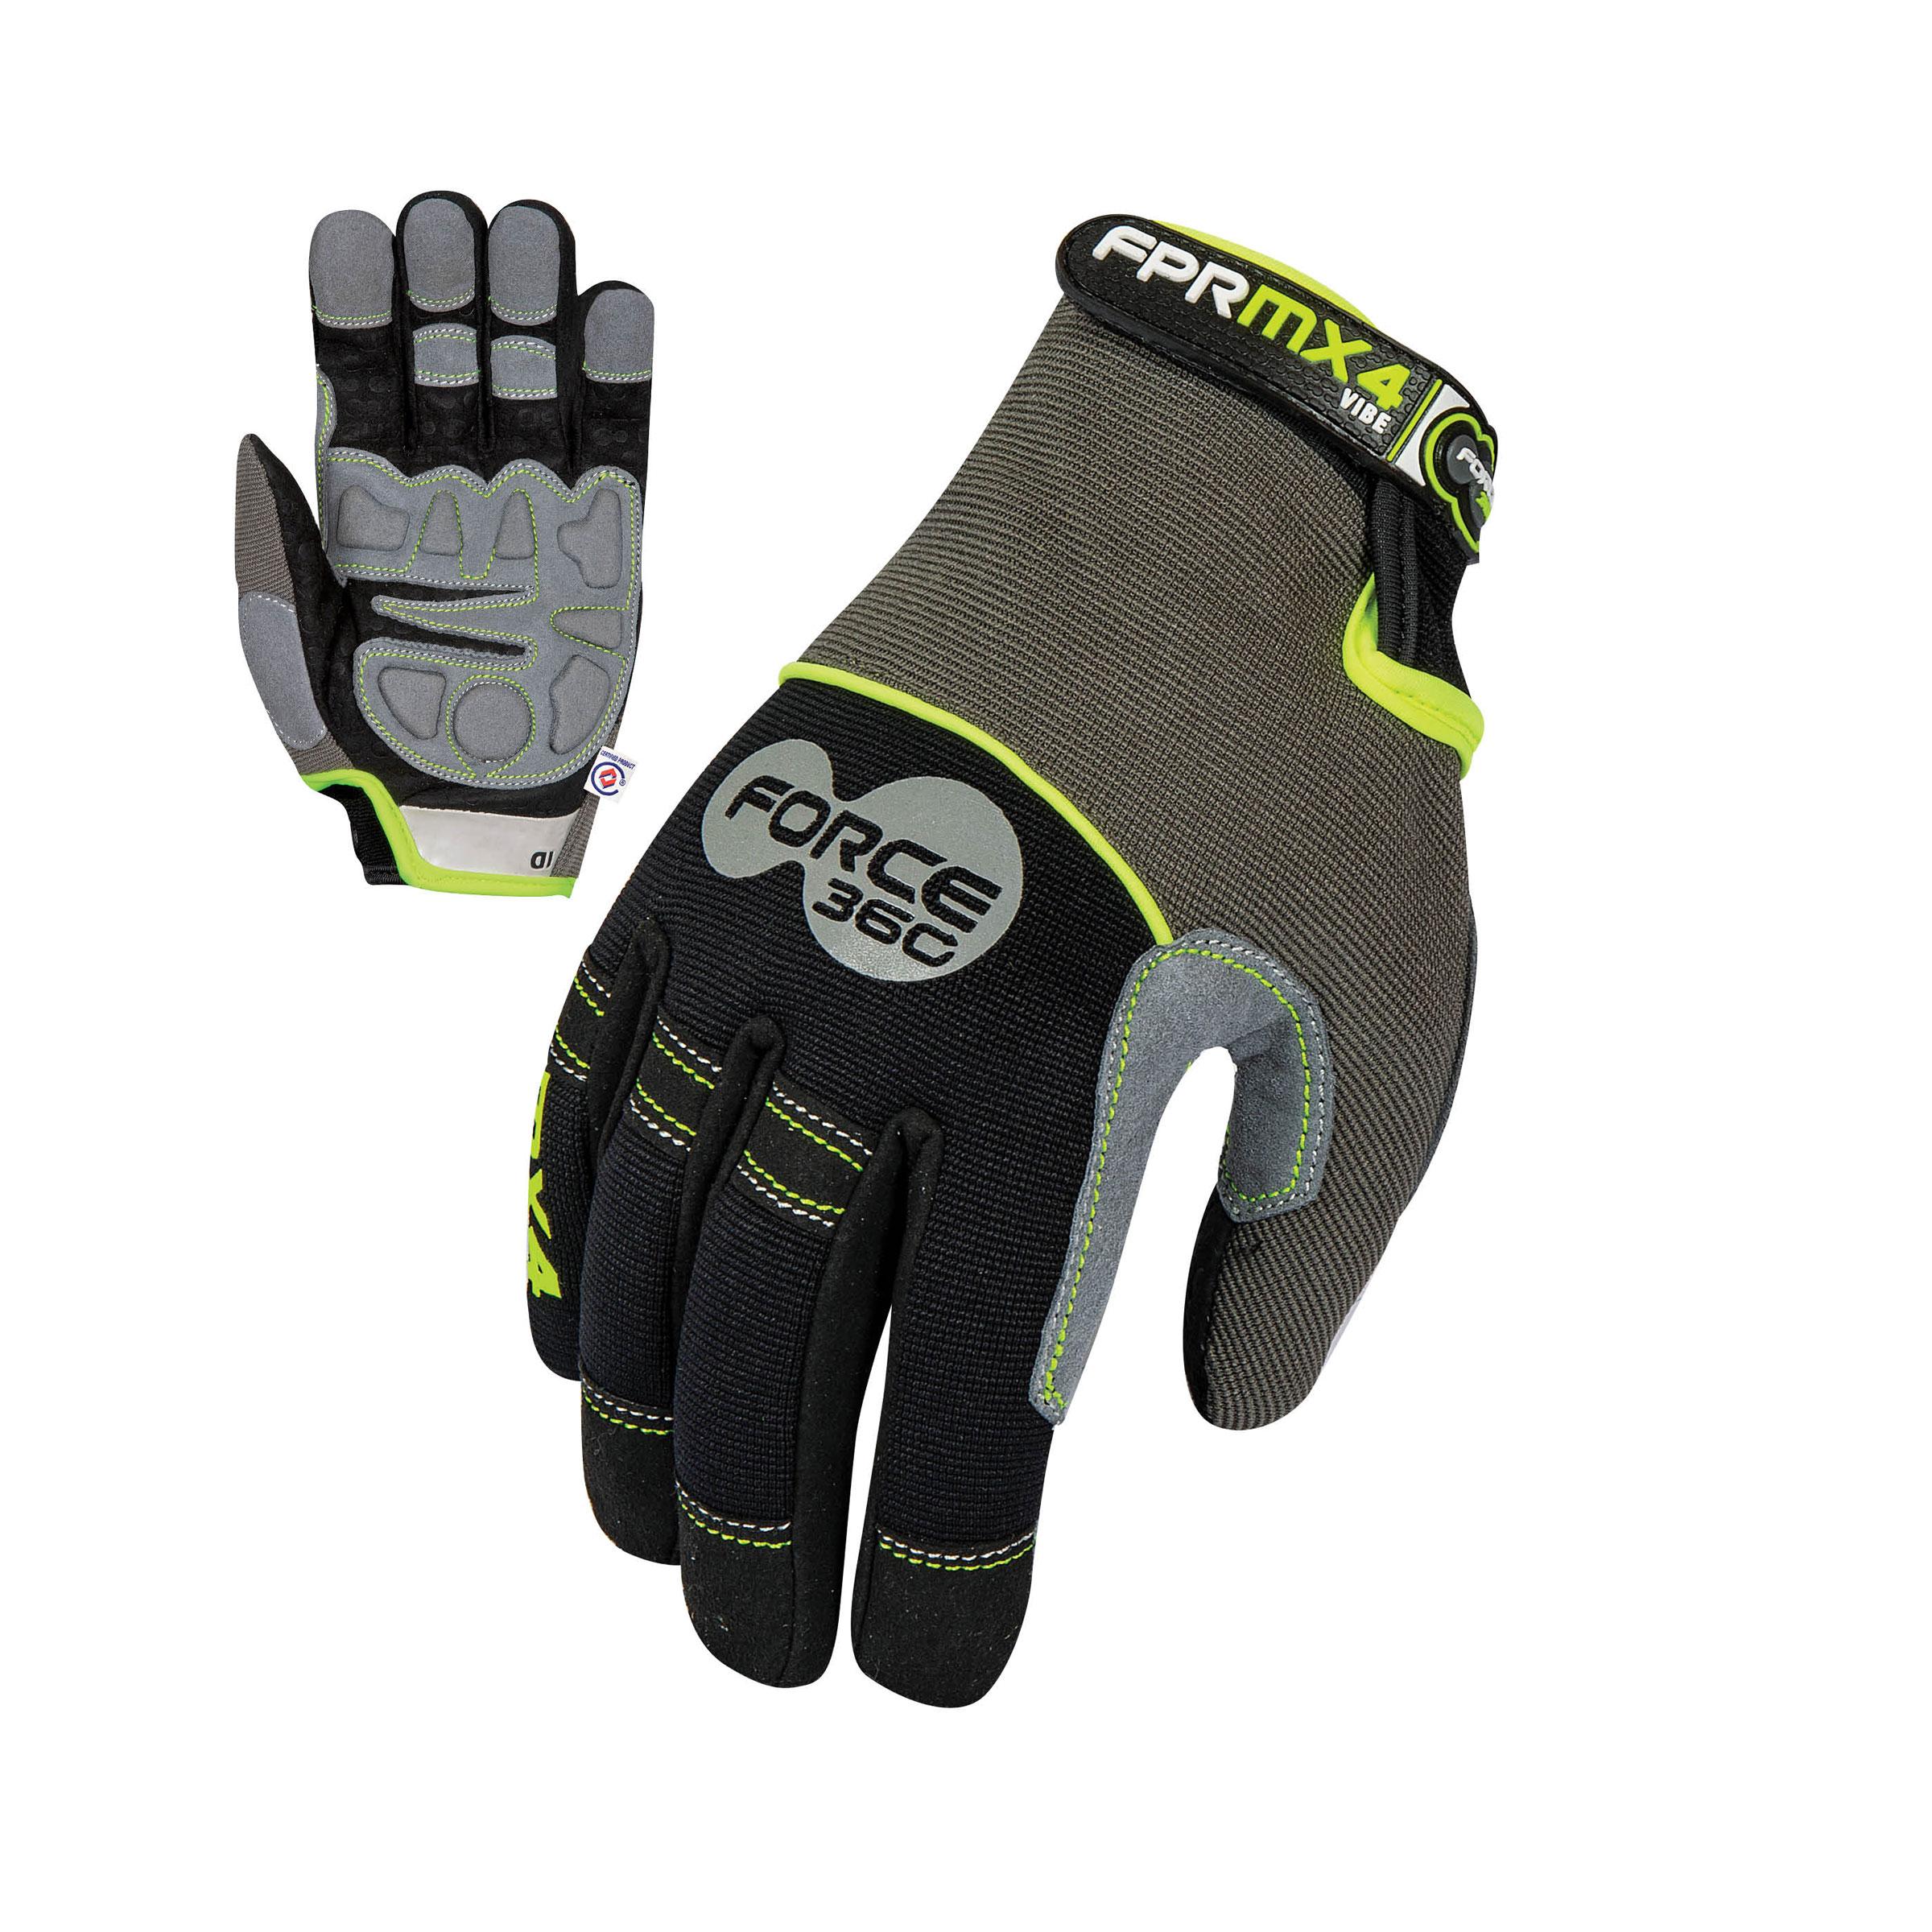 F360 GFPRMX4 Vibe Gloves